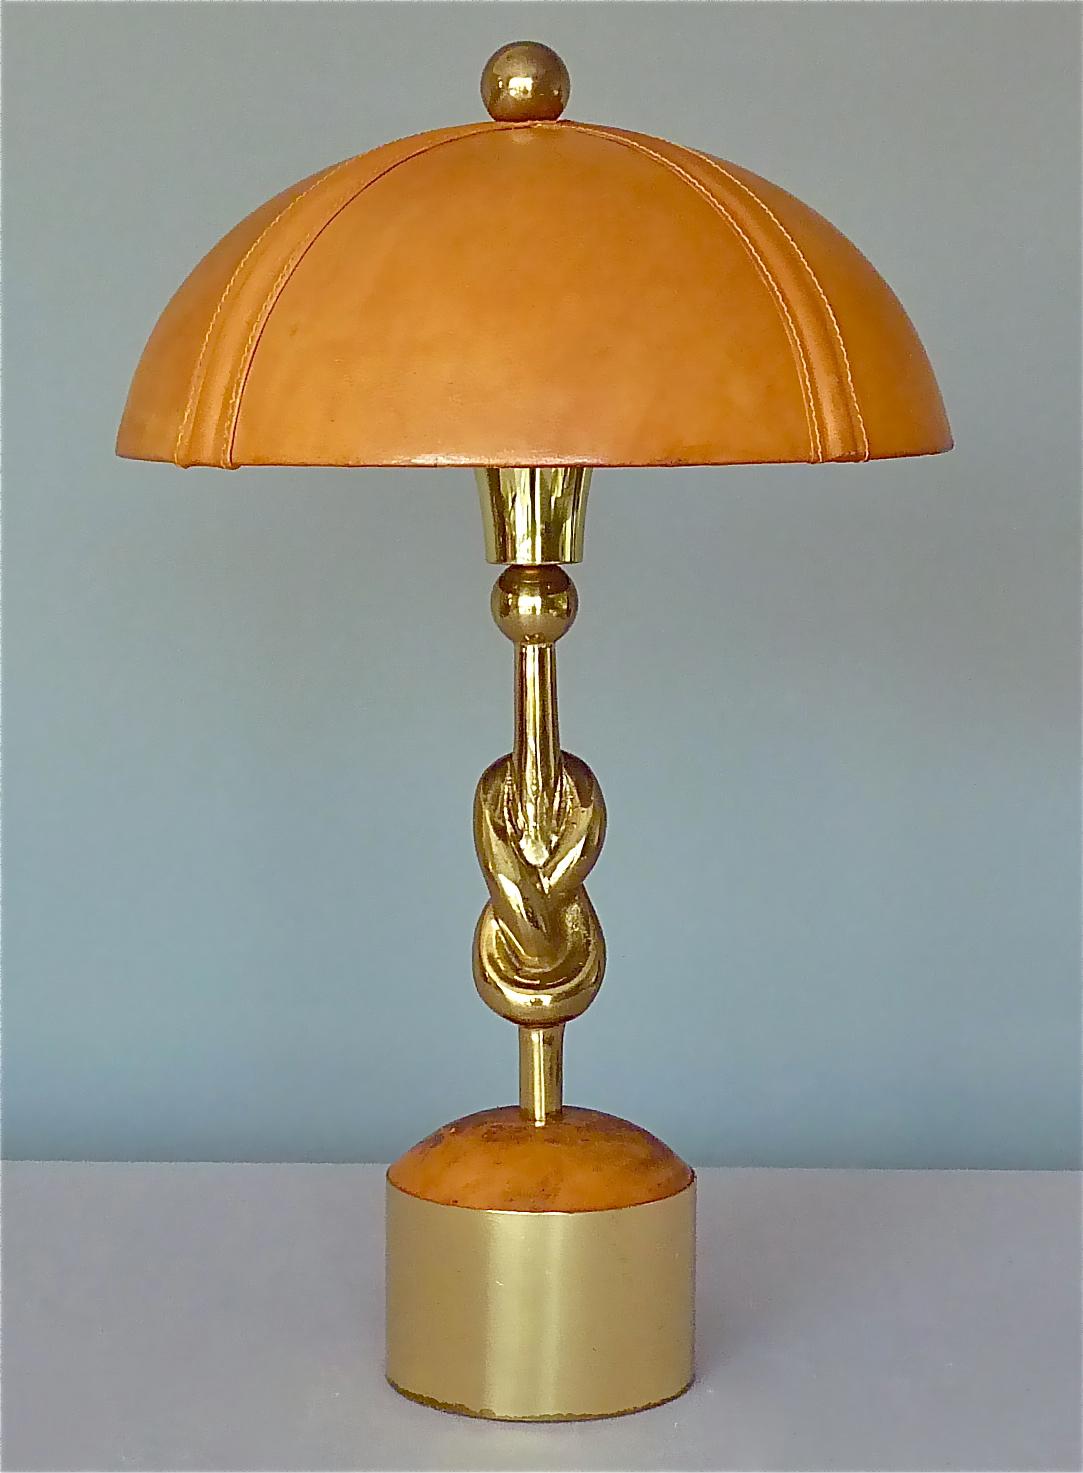 Sculptural French and probably unique knotted table lamp, France around 1970s. The rare table lamp which is made of patinated gilt brass and bronze has a cylinder base with leather top which has a width of 12 cm / 4.72 inches, a beautiful sculptural